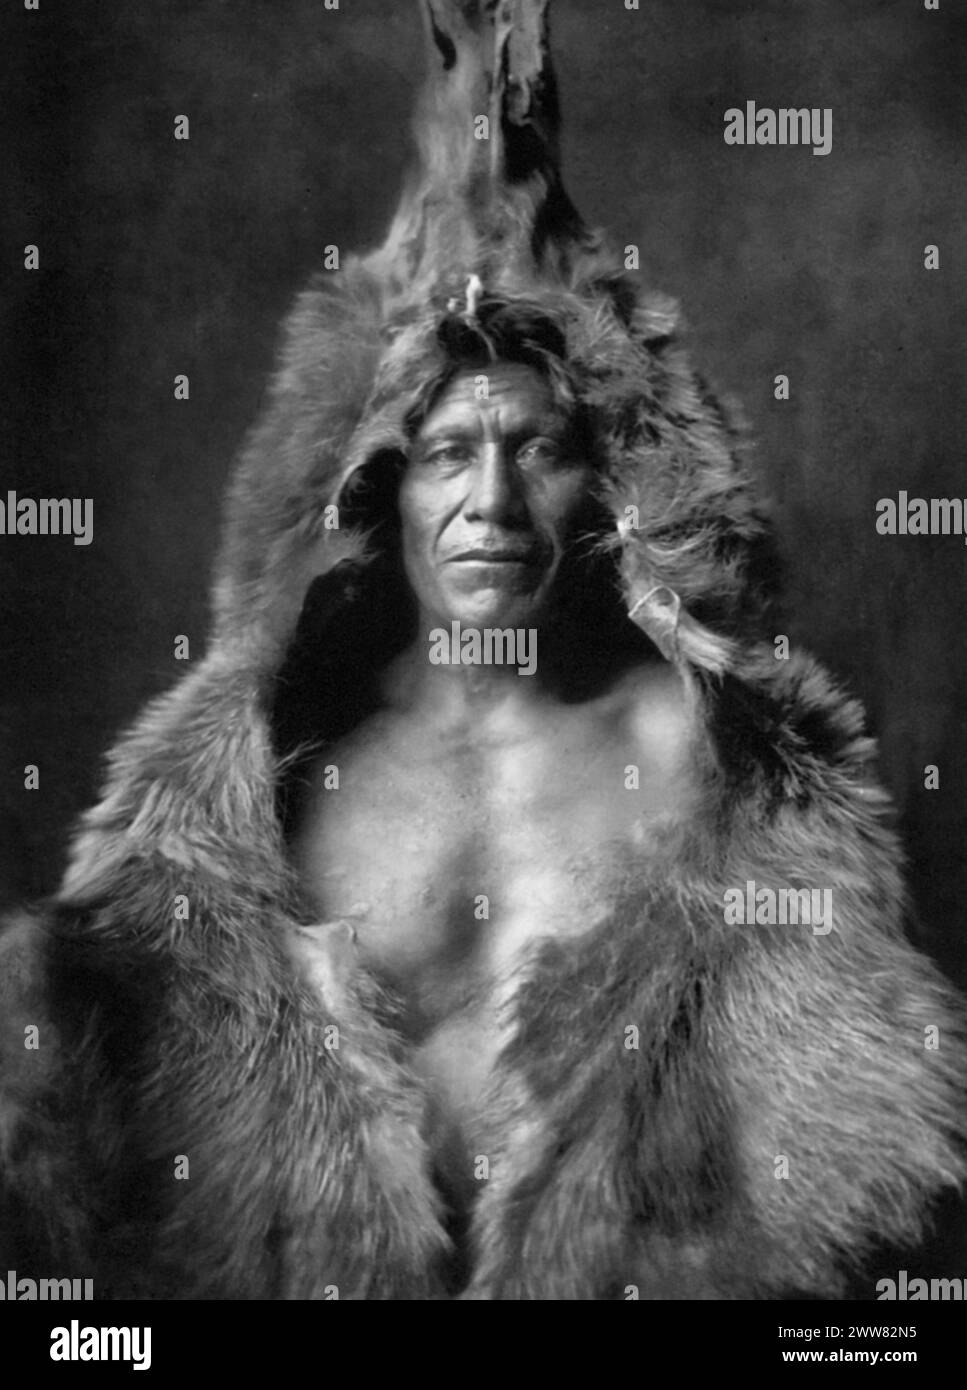 Edward Curtis - Bear's Belly - 'A member of the medicine fraternity, wrapped in his sacred bear-skin' (Arikara people) - 1908 Stock Photo